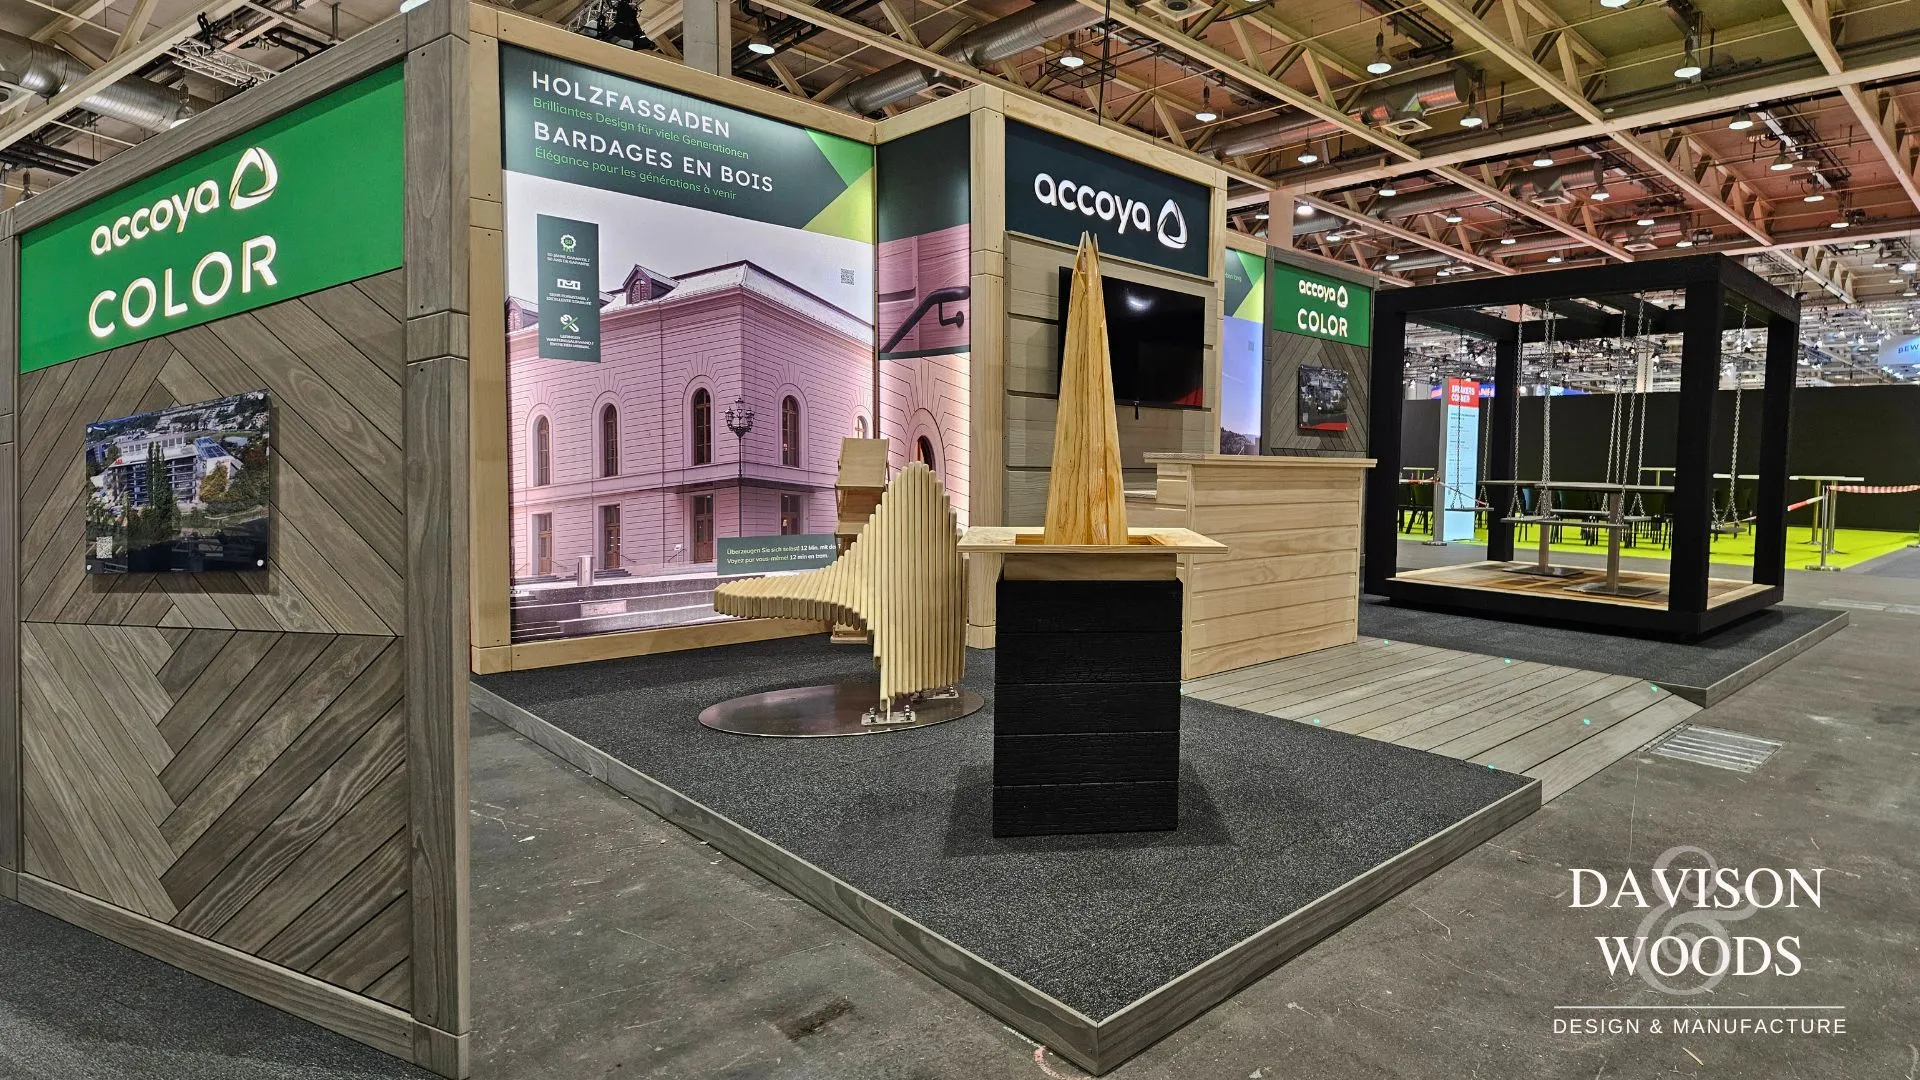 A diamond pattern wall made of Accoya Color Grey planks stands next to a wall with large wall graphics stating Accoya Color